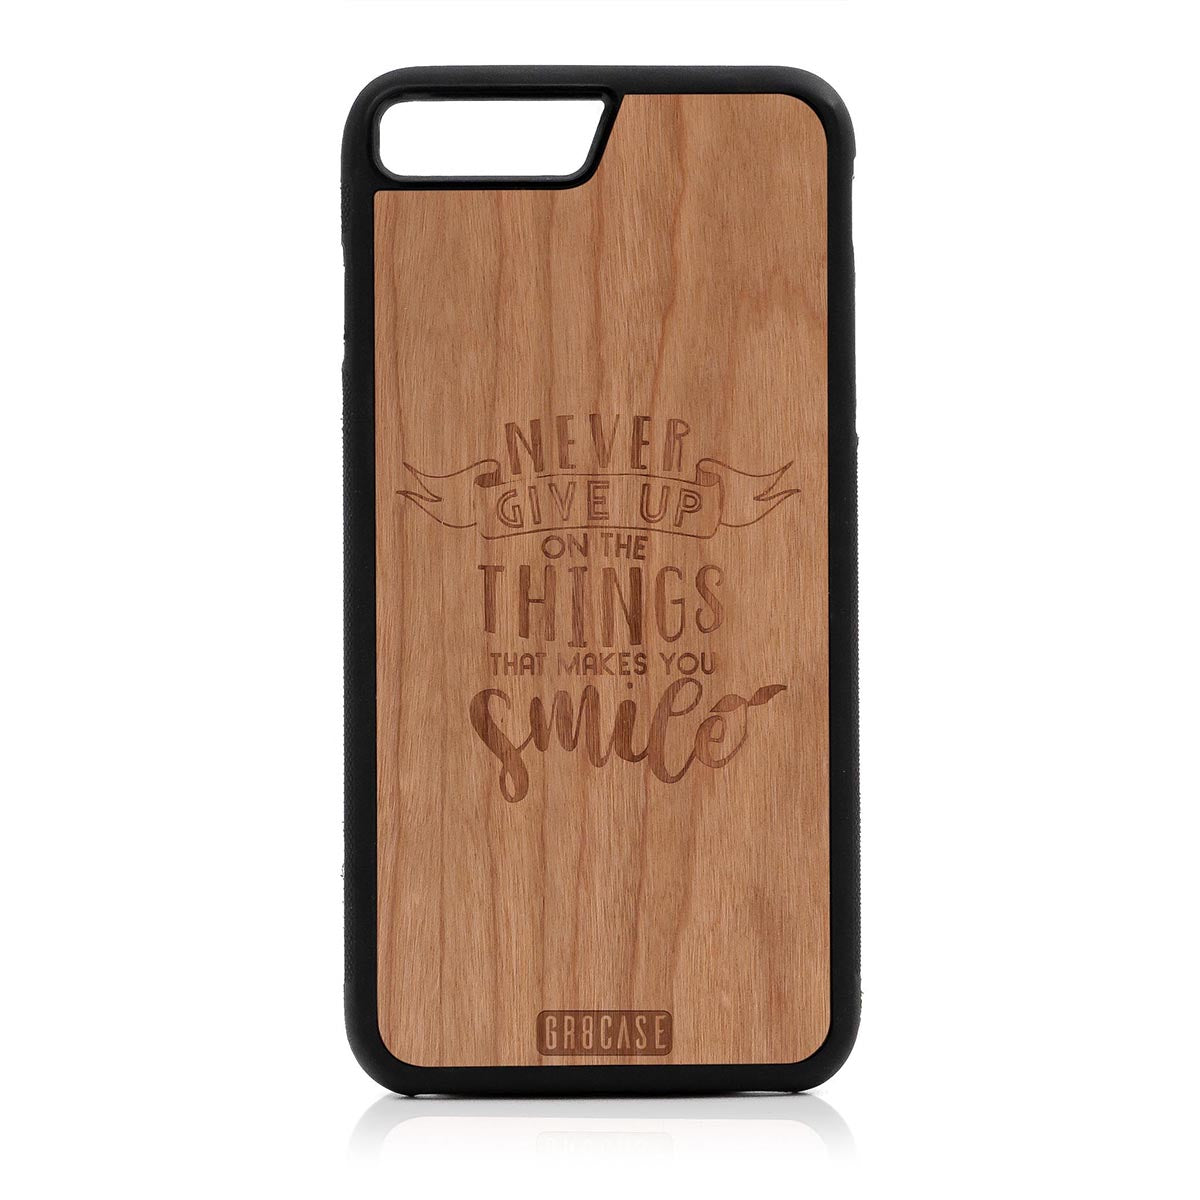 Never Give Up On The Things That Makes You Smile Design Wood Case For iPhone 7/8 by GR8CASE